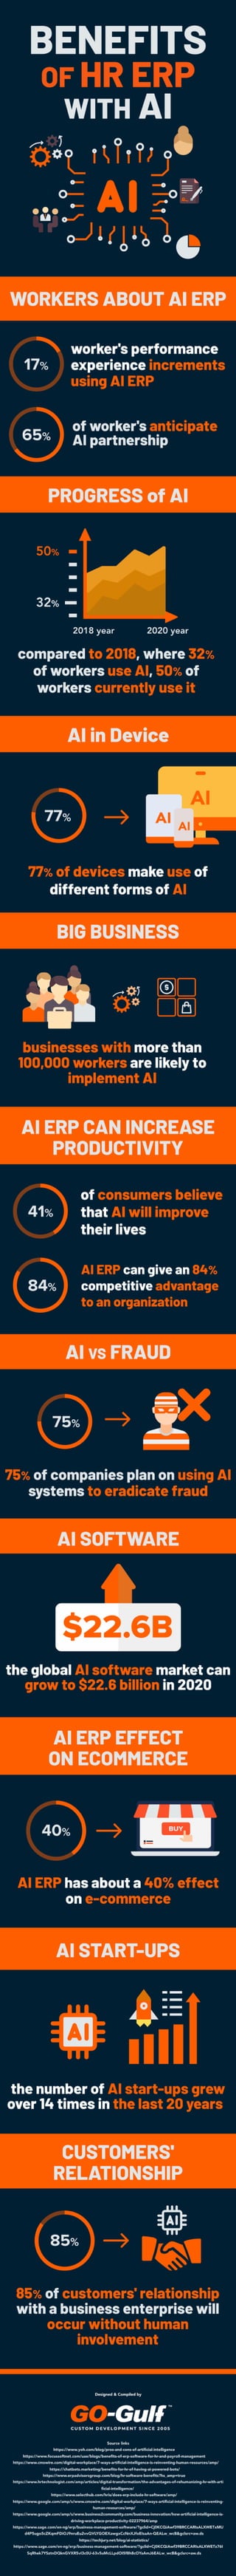 Benefits of HR ERP with AI [Infographic]